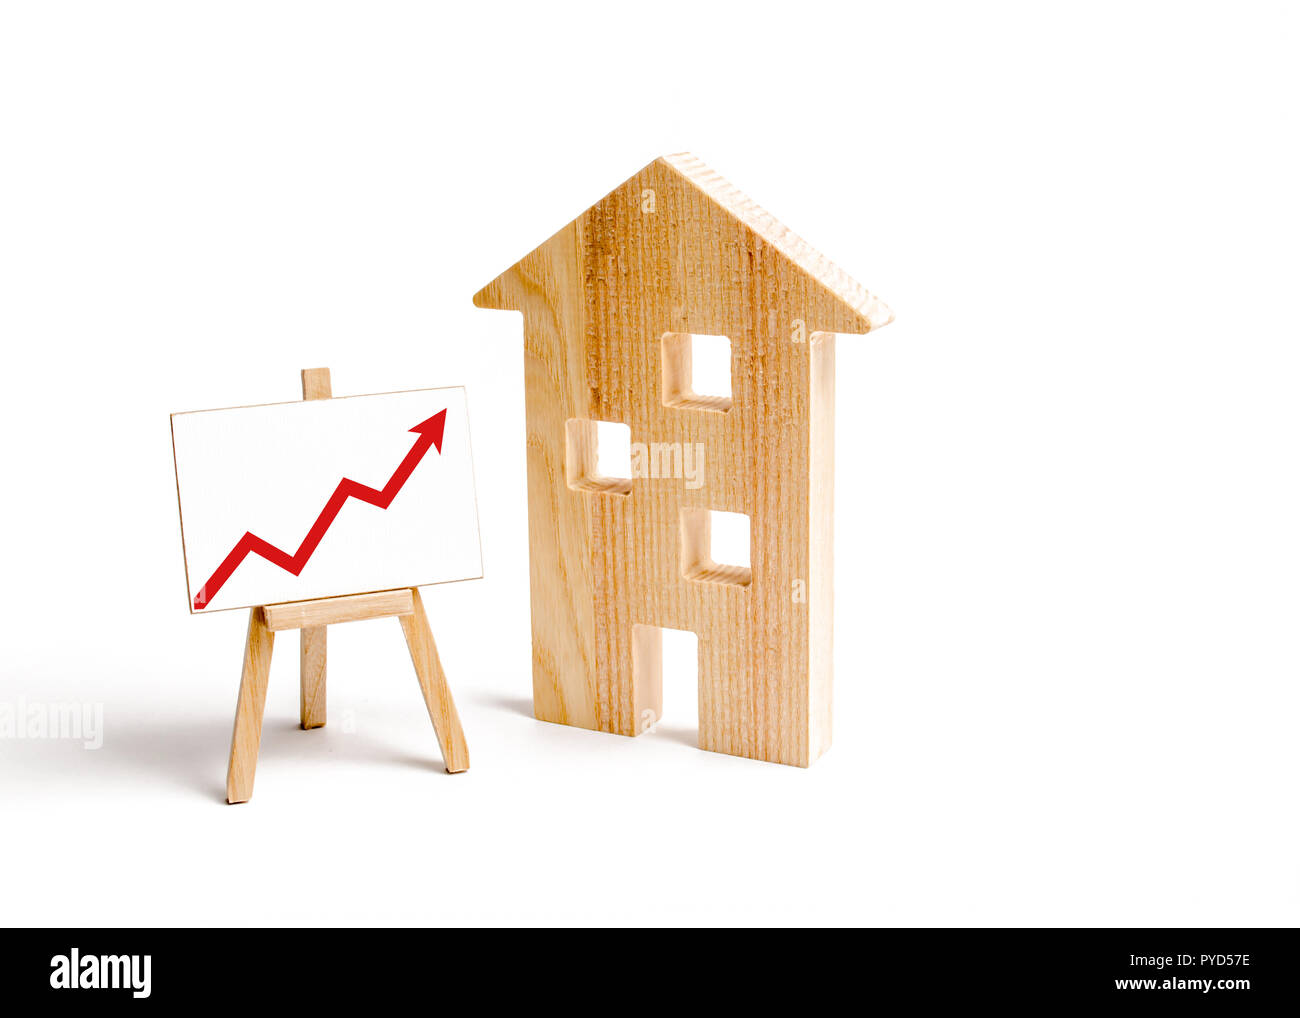 Wooden houses and stand with red arrow up. Growing demand for housing and real estate. The growth of the city and its population. Investments. concept Stock Photo